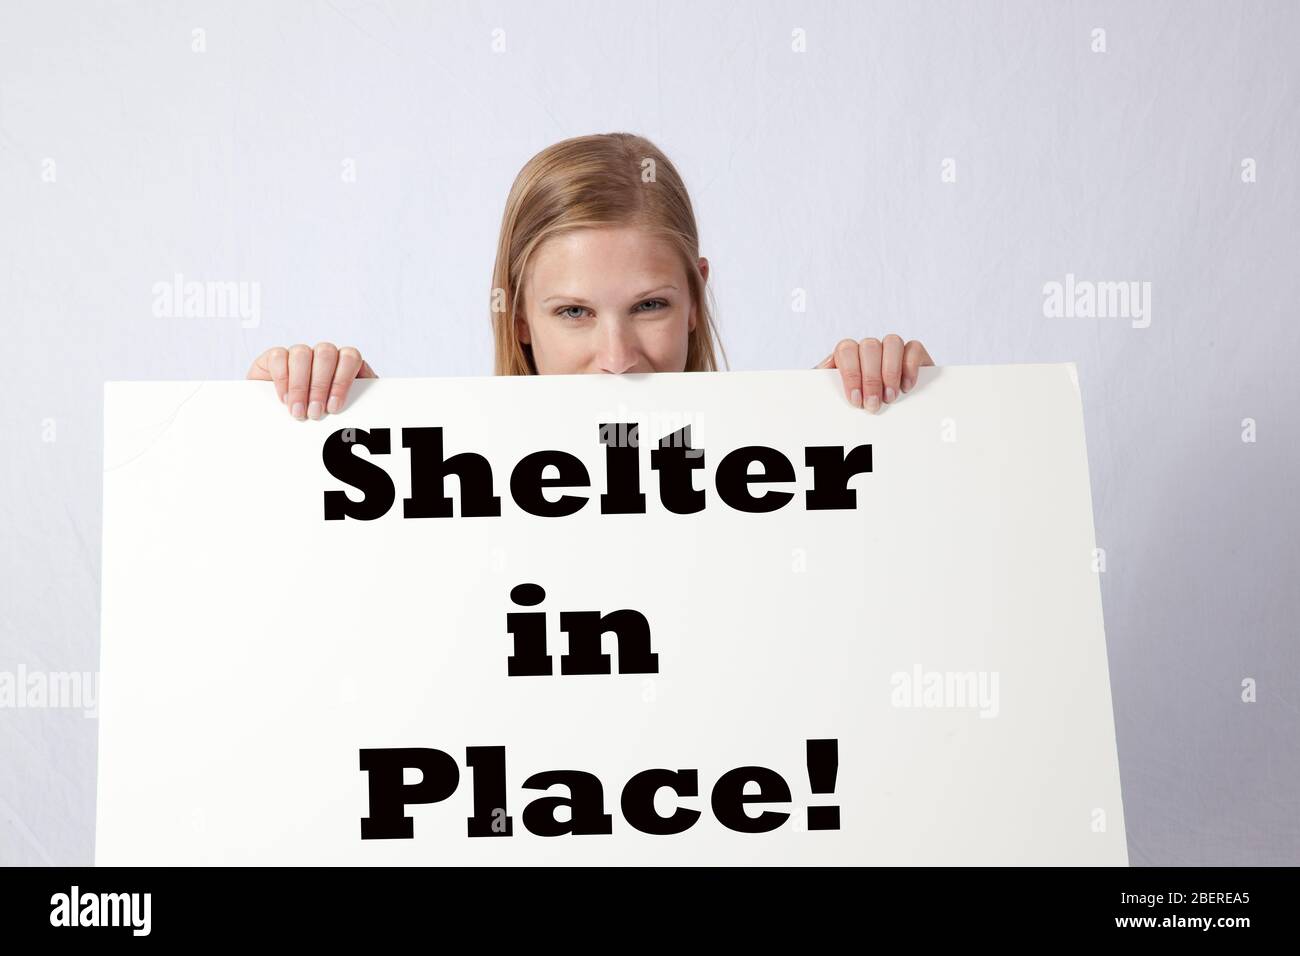 Woman holding a sign that says 'Shelter in Place!' Stock Photo